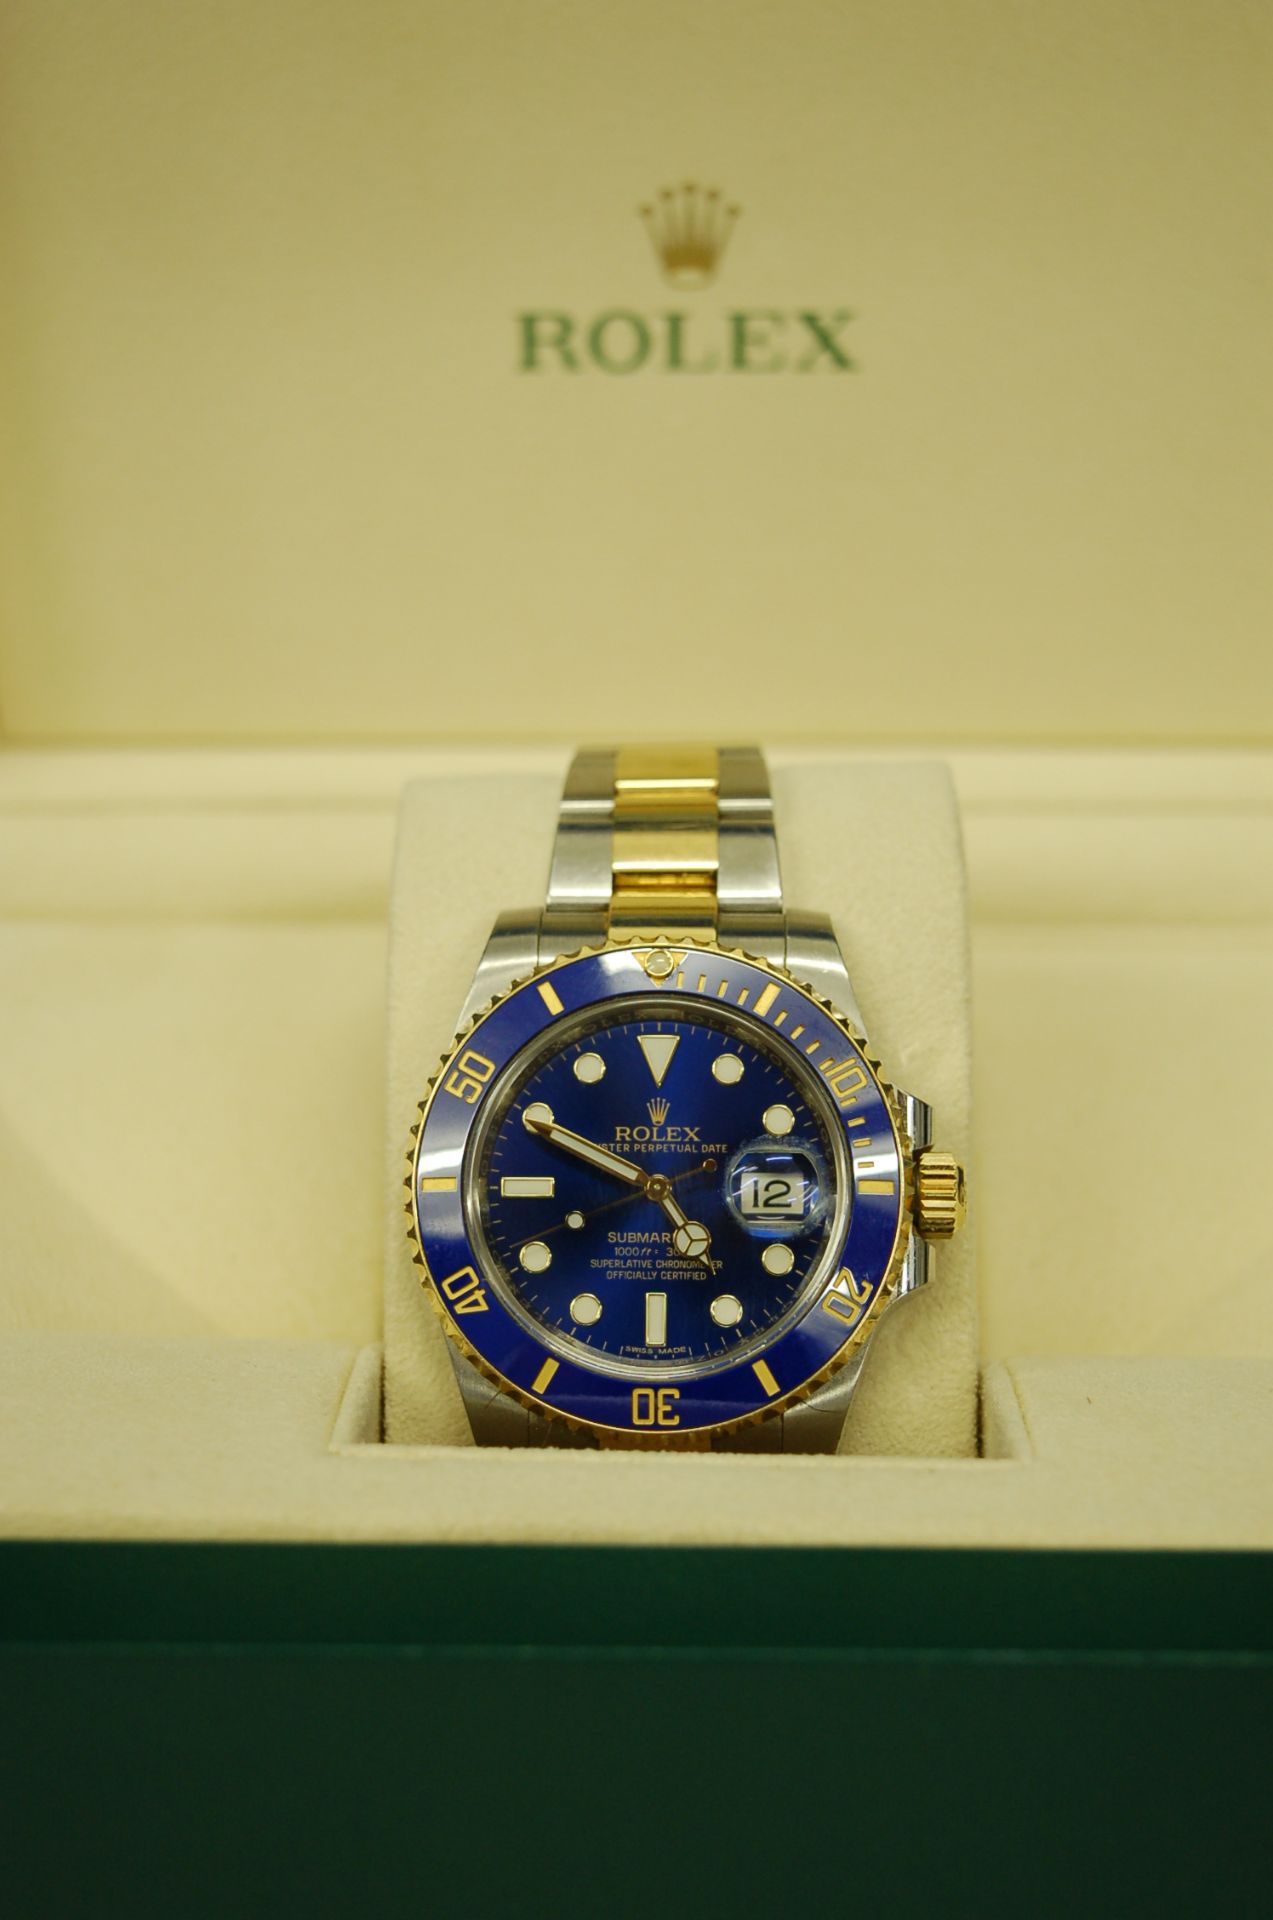 Rolex OYSTER SUBMARINER GENTLEMAN’S STAINLESS STEE - Image 7 of 12